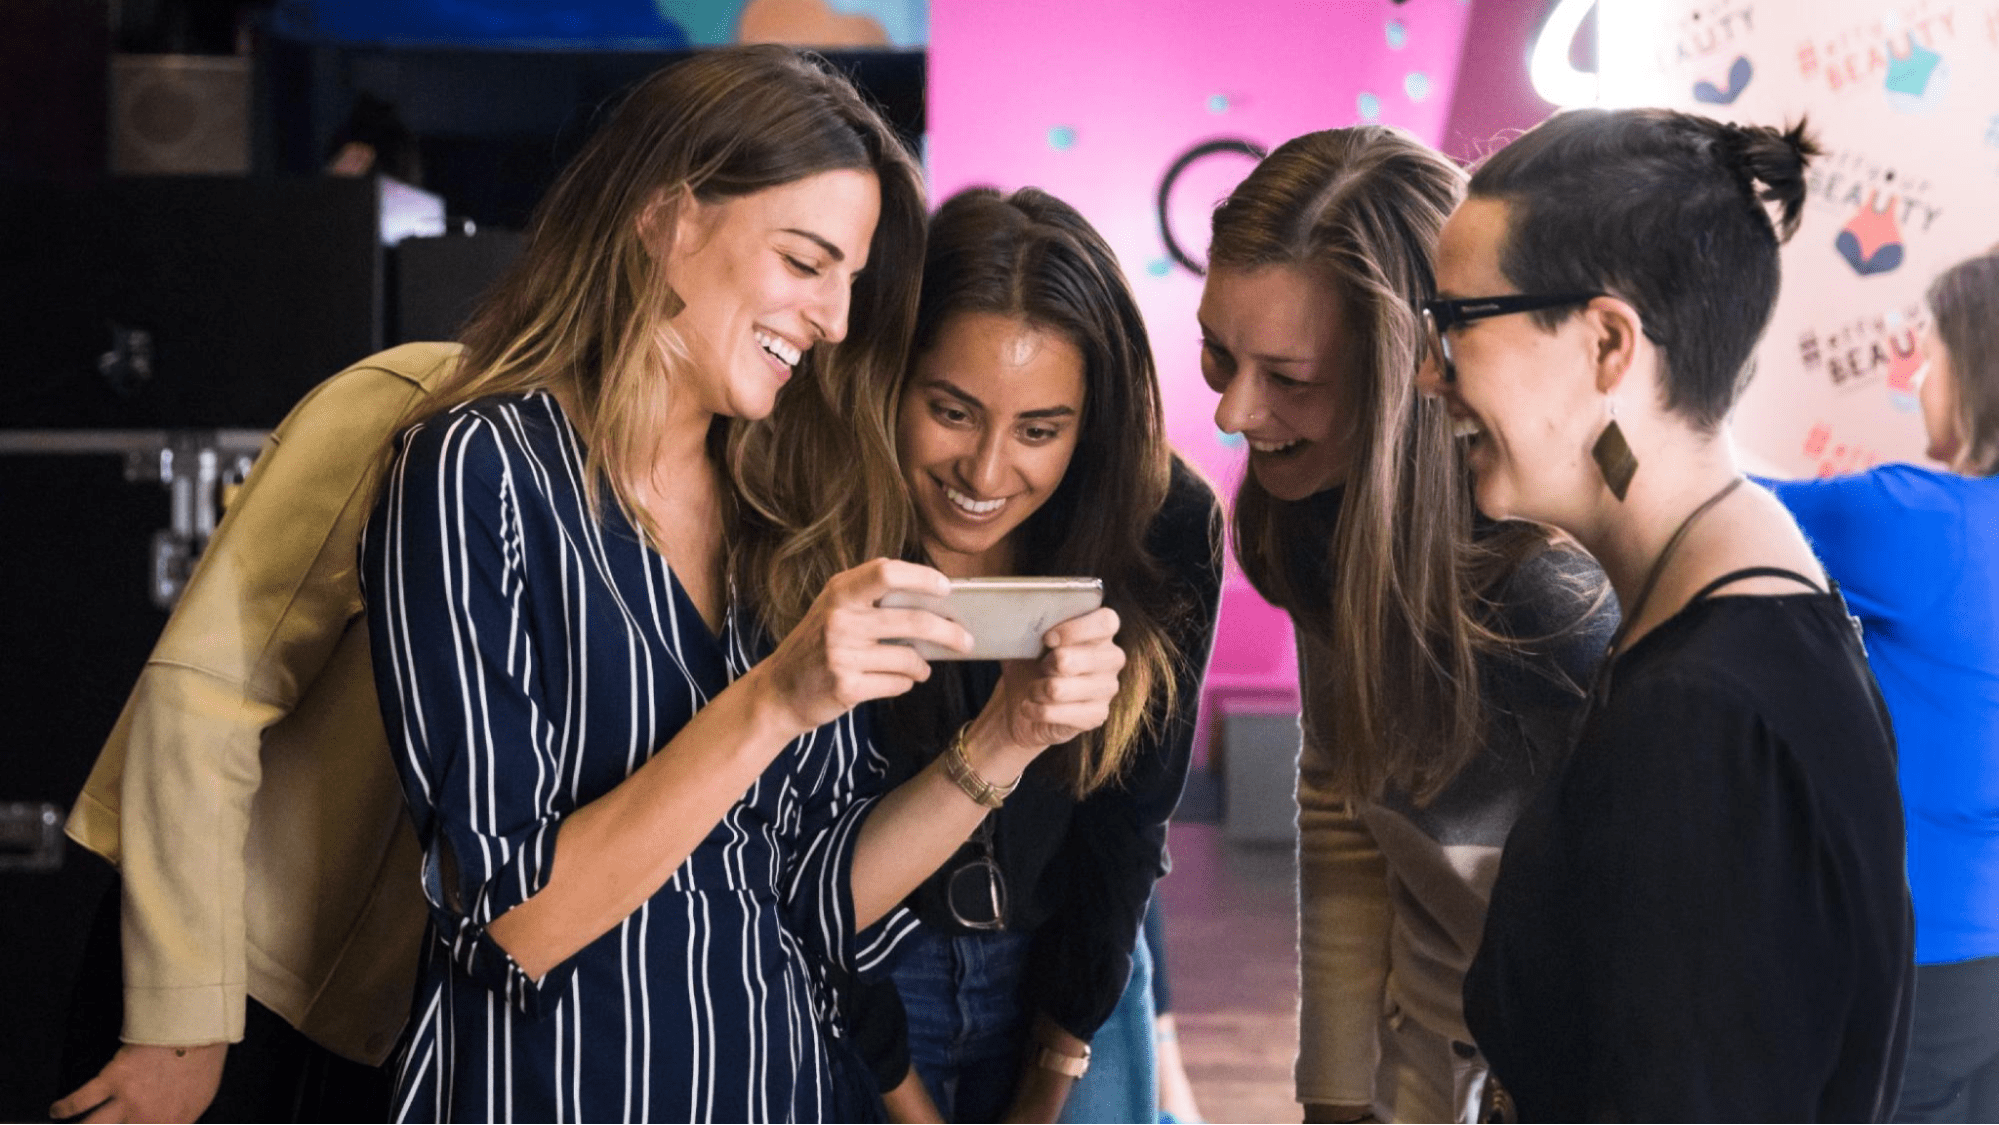 Women looking at phone laughing